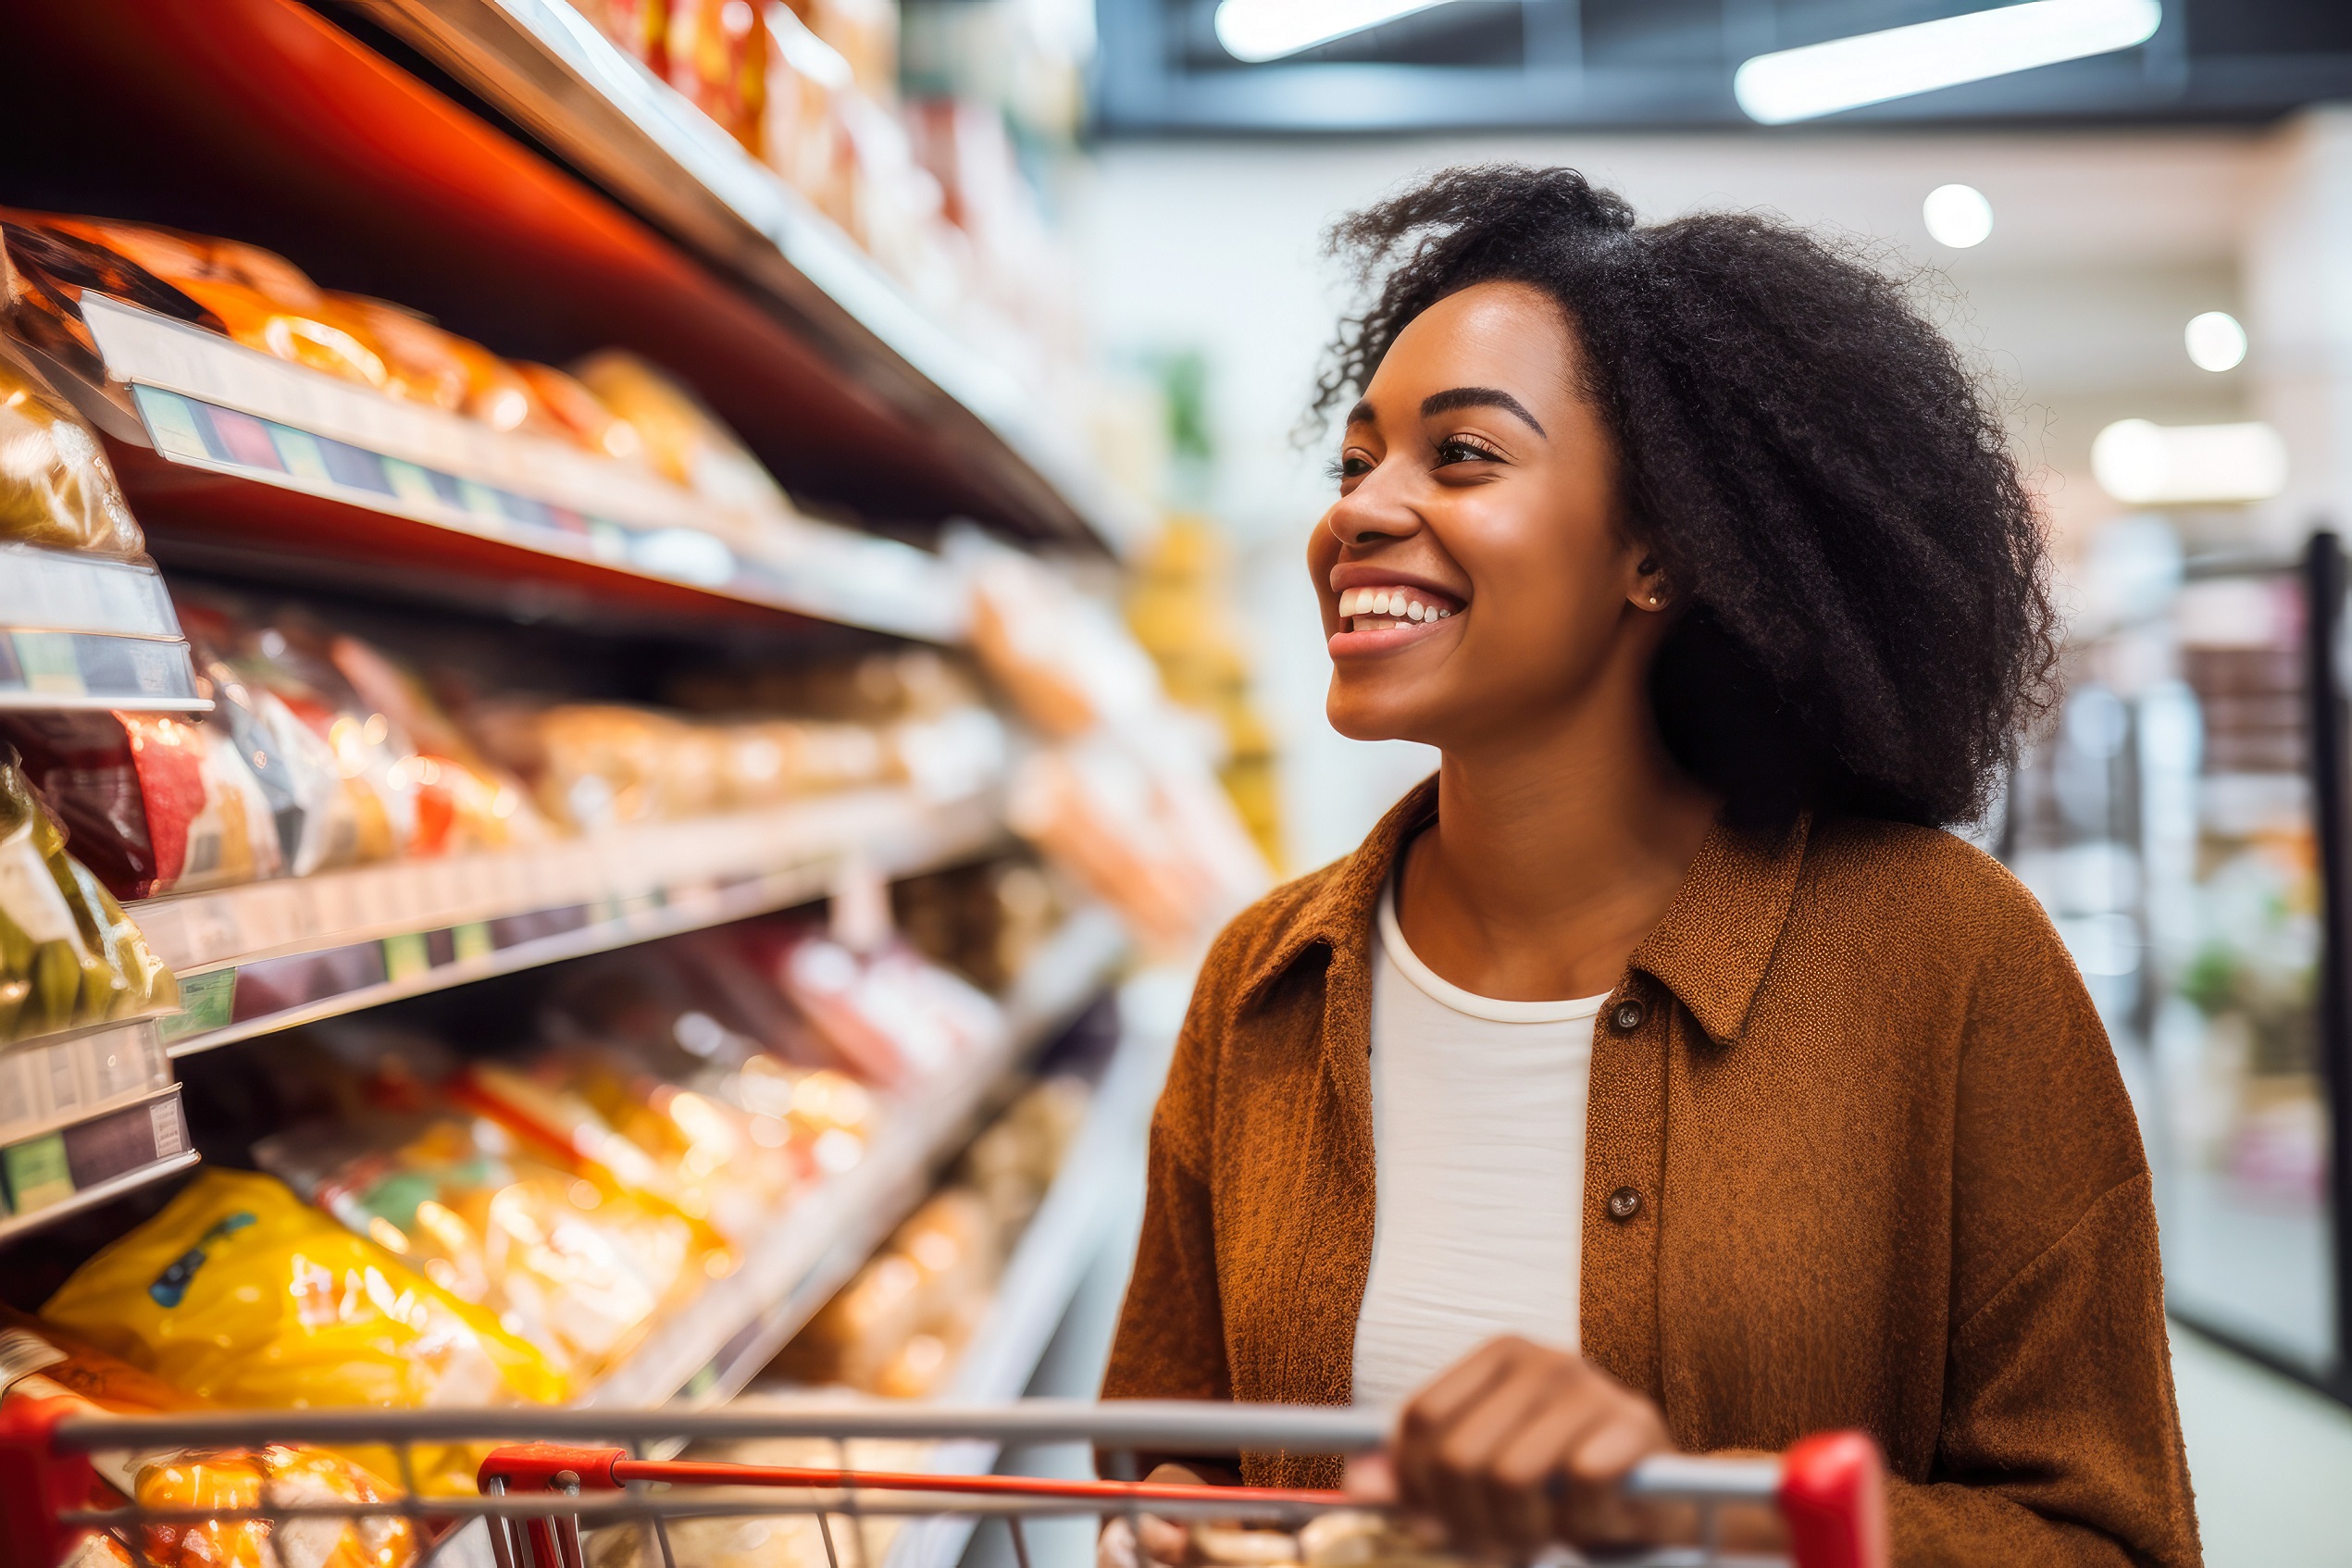 The Ultimate Budget Grocery List to Help You Save Money